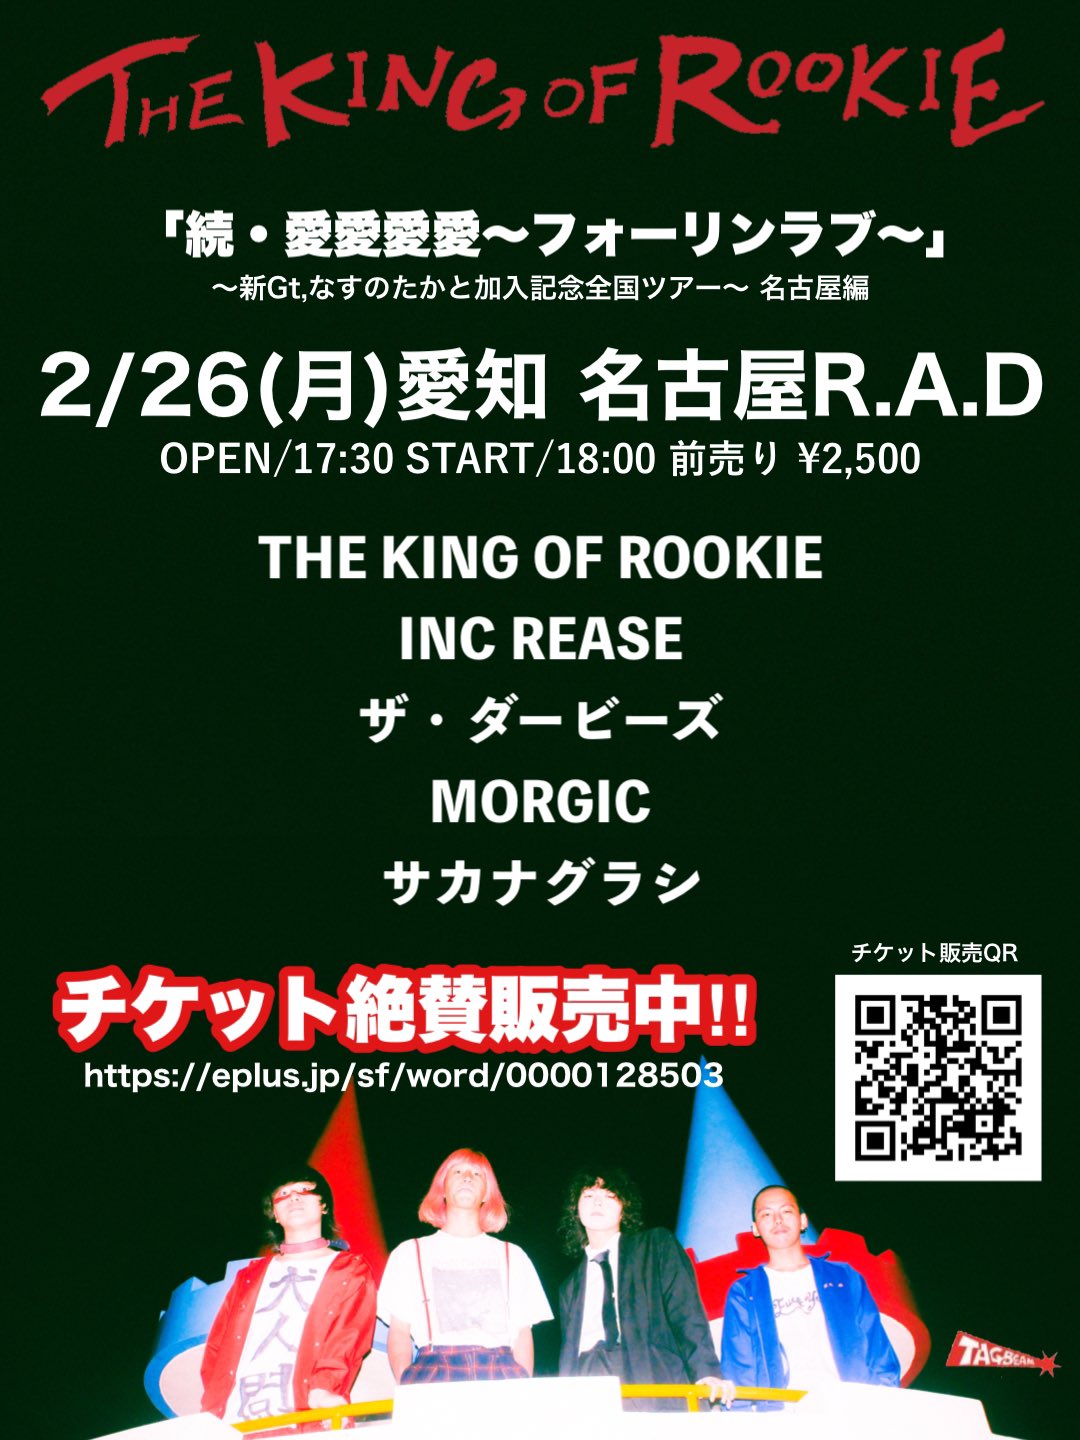 THE KING OF ROOKIE 「愛愛愛愛～フォーリンラブ～」おかわりツアー